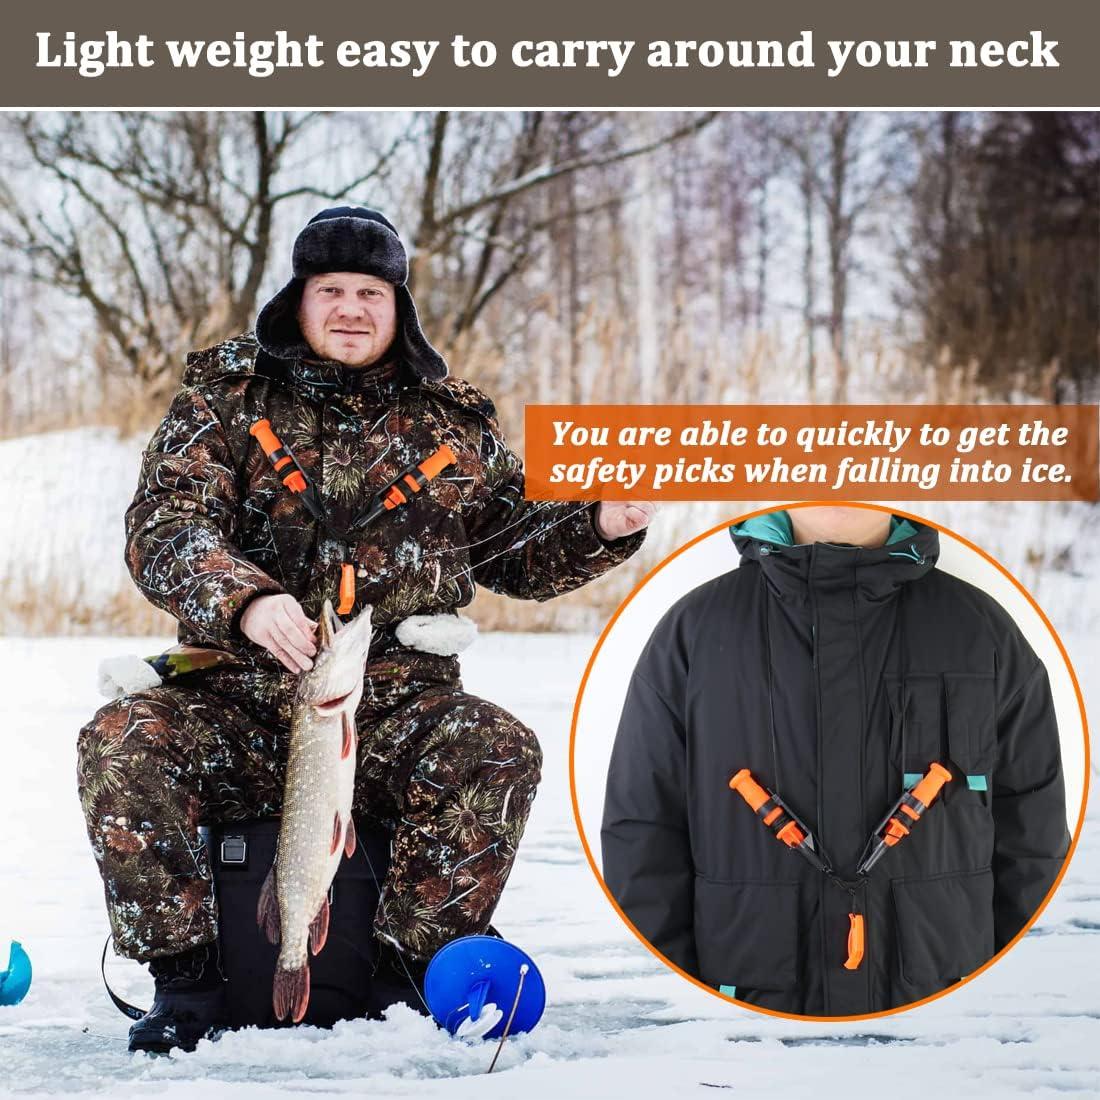 Boaton Ice Safety Picks, Safety Kits for Ice Fishing and Ice Skating, Save  You from Falling Into Ice, Floating and Safe to Use